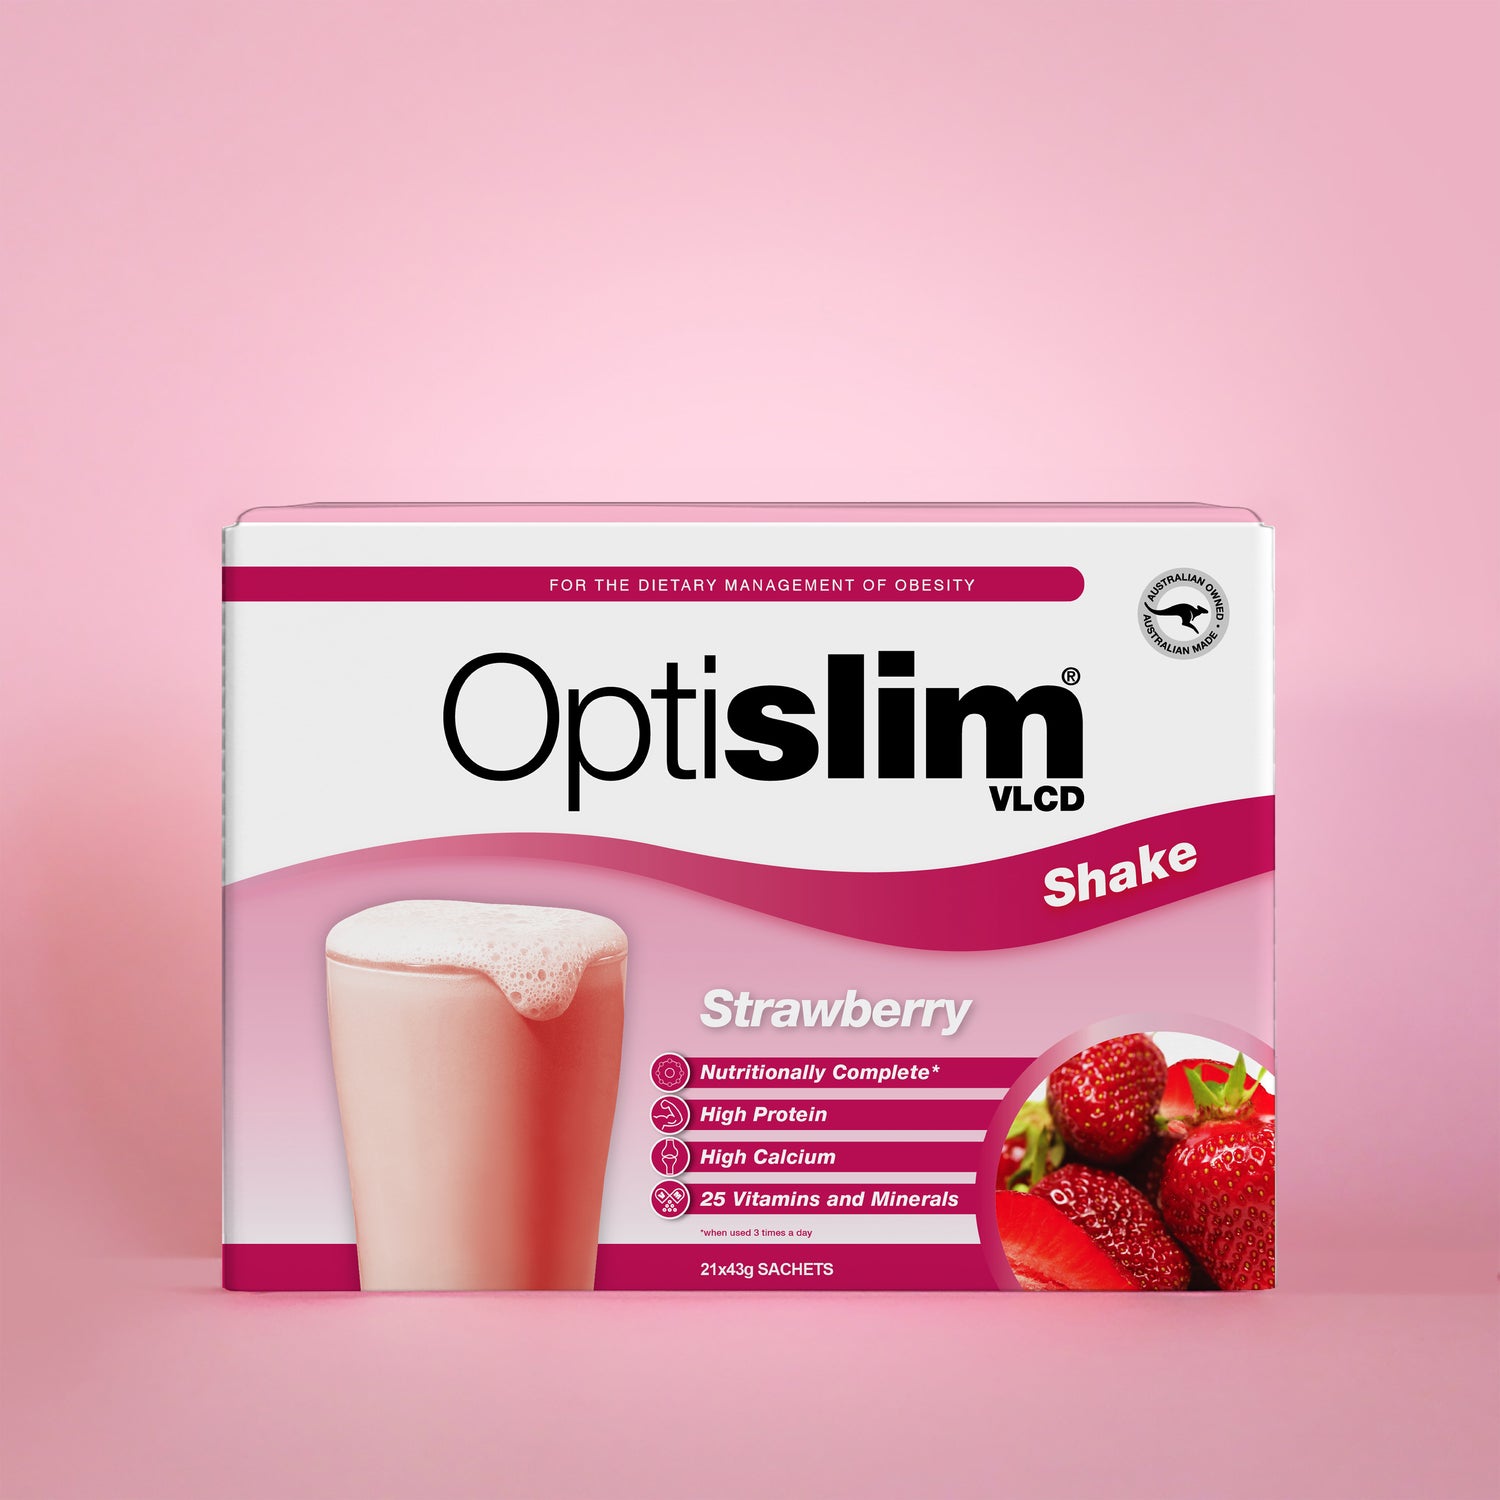 VLCD Meal Replacement Shake Strawberry